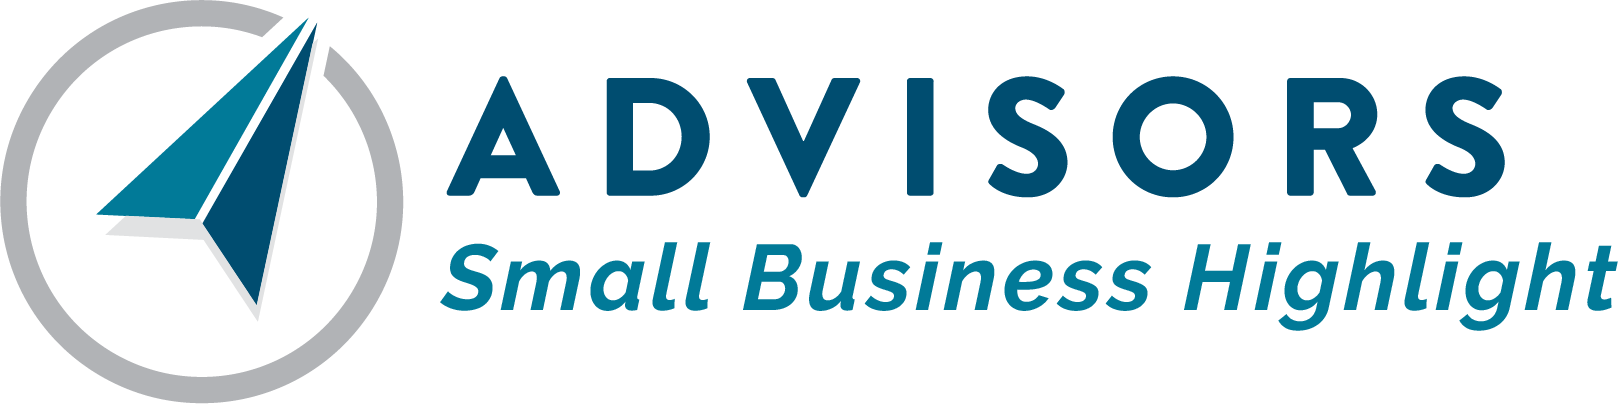 Advisors Small Business Highligt